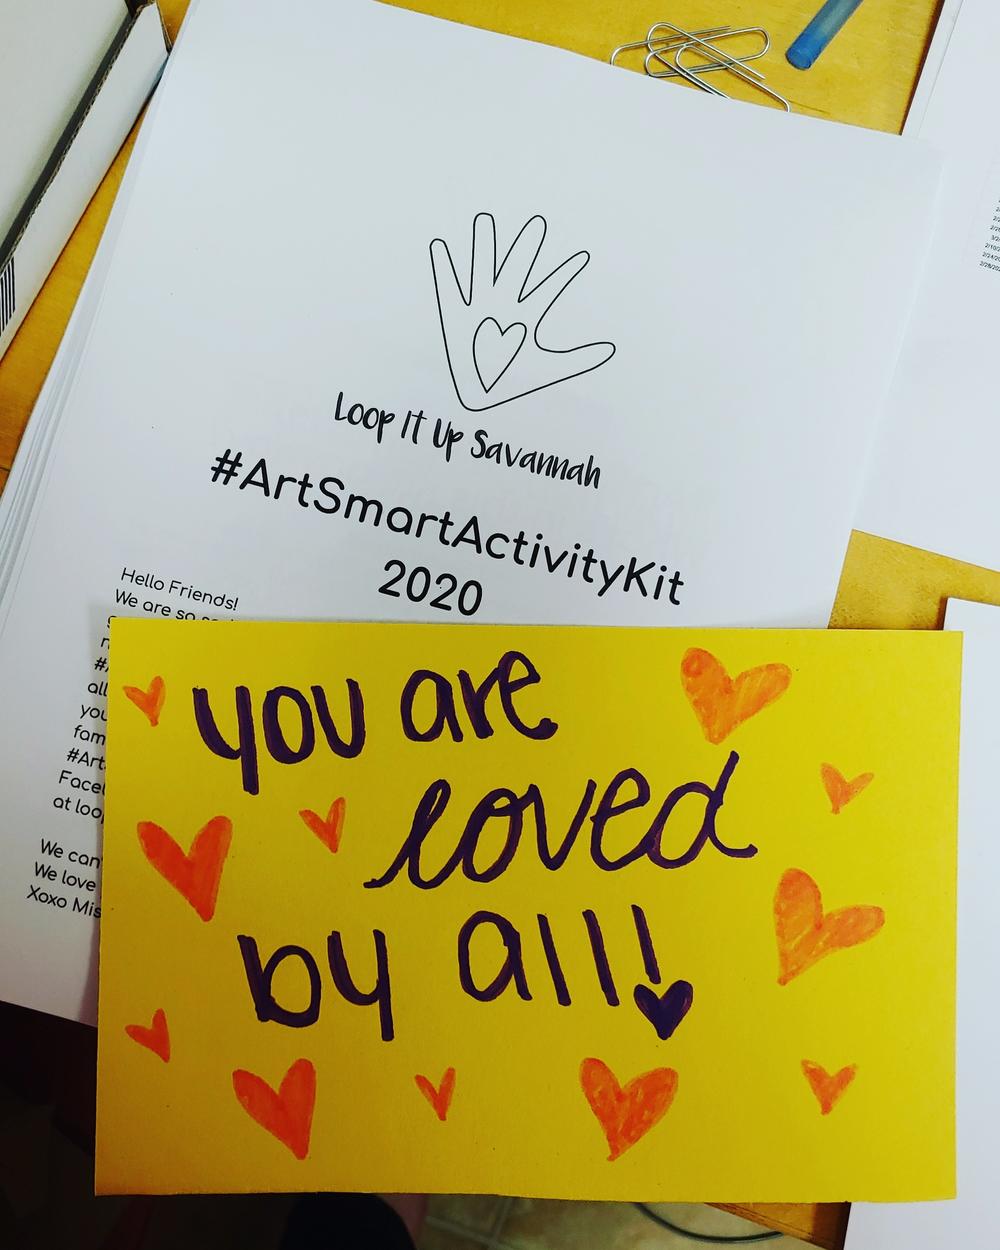 Every #ArtSmartActivityKit includes a personal note from one of the people who helped package the kit.